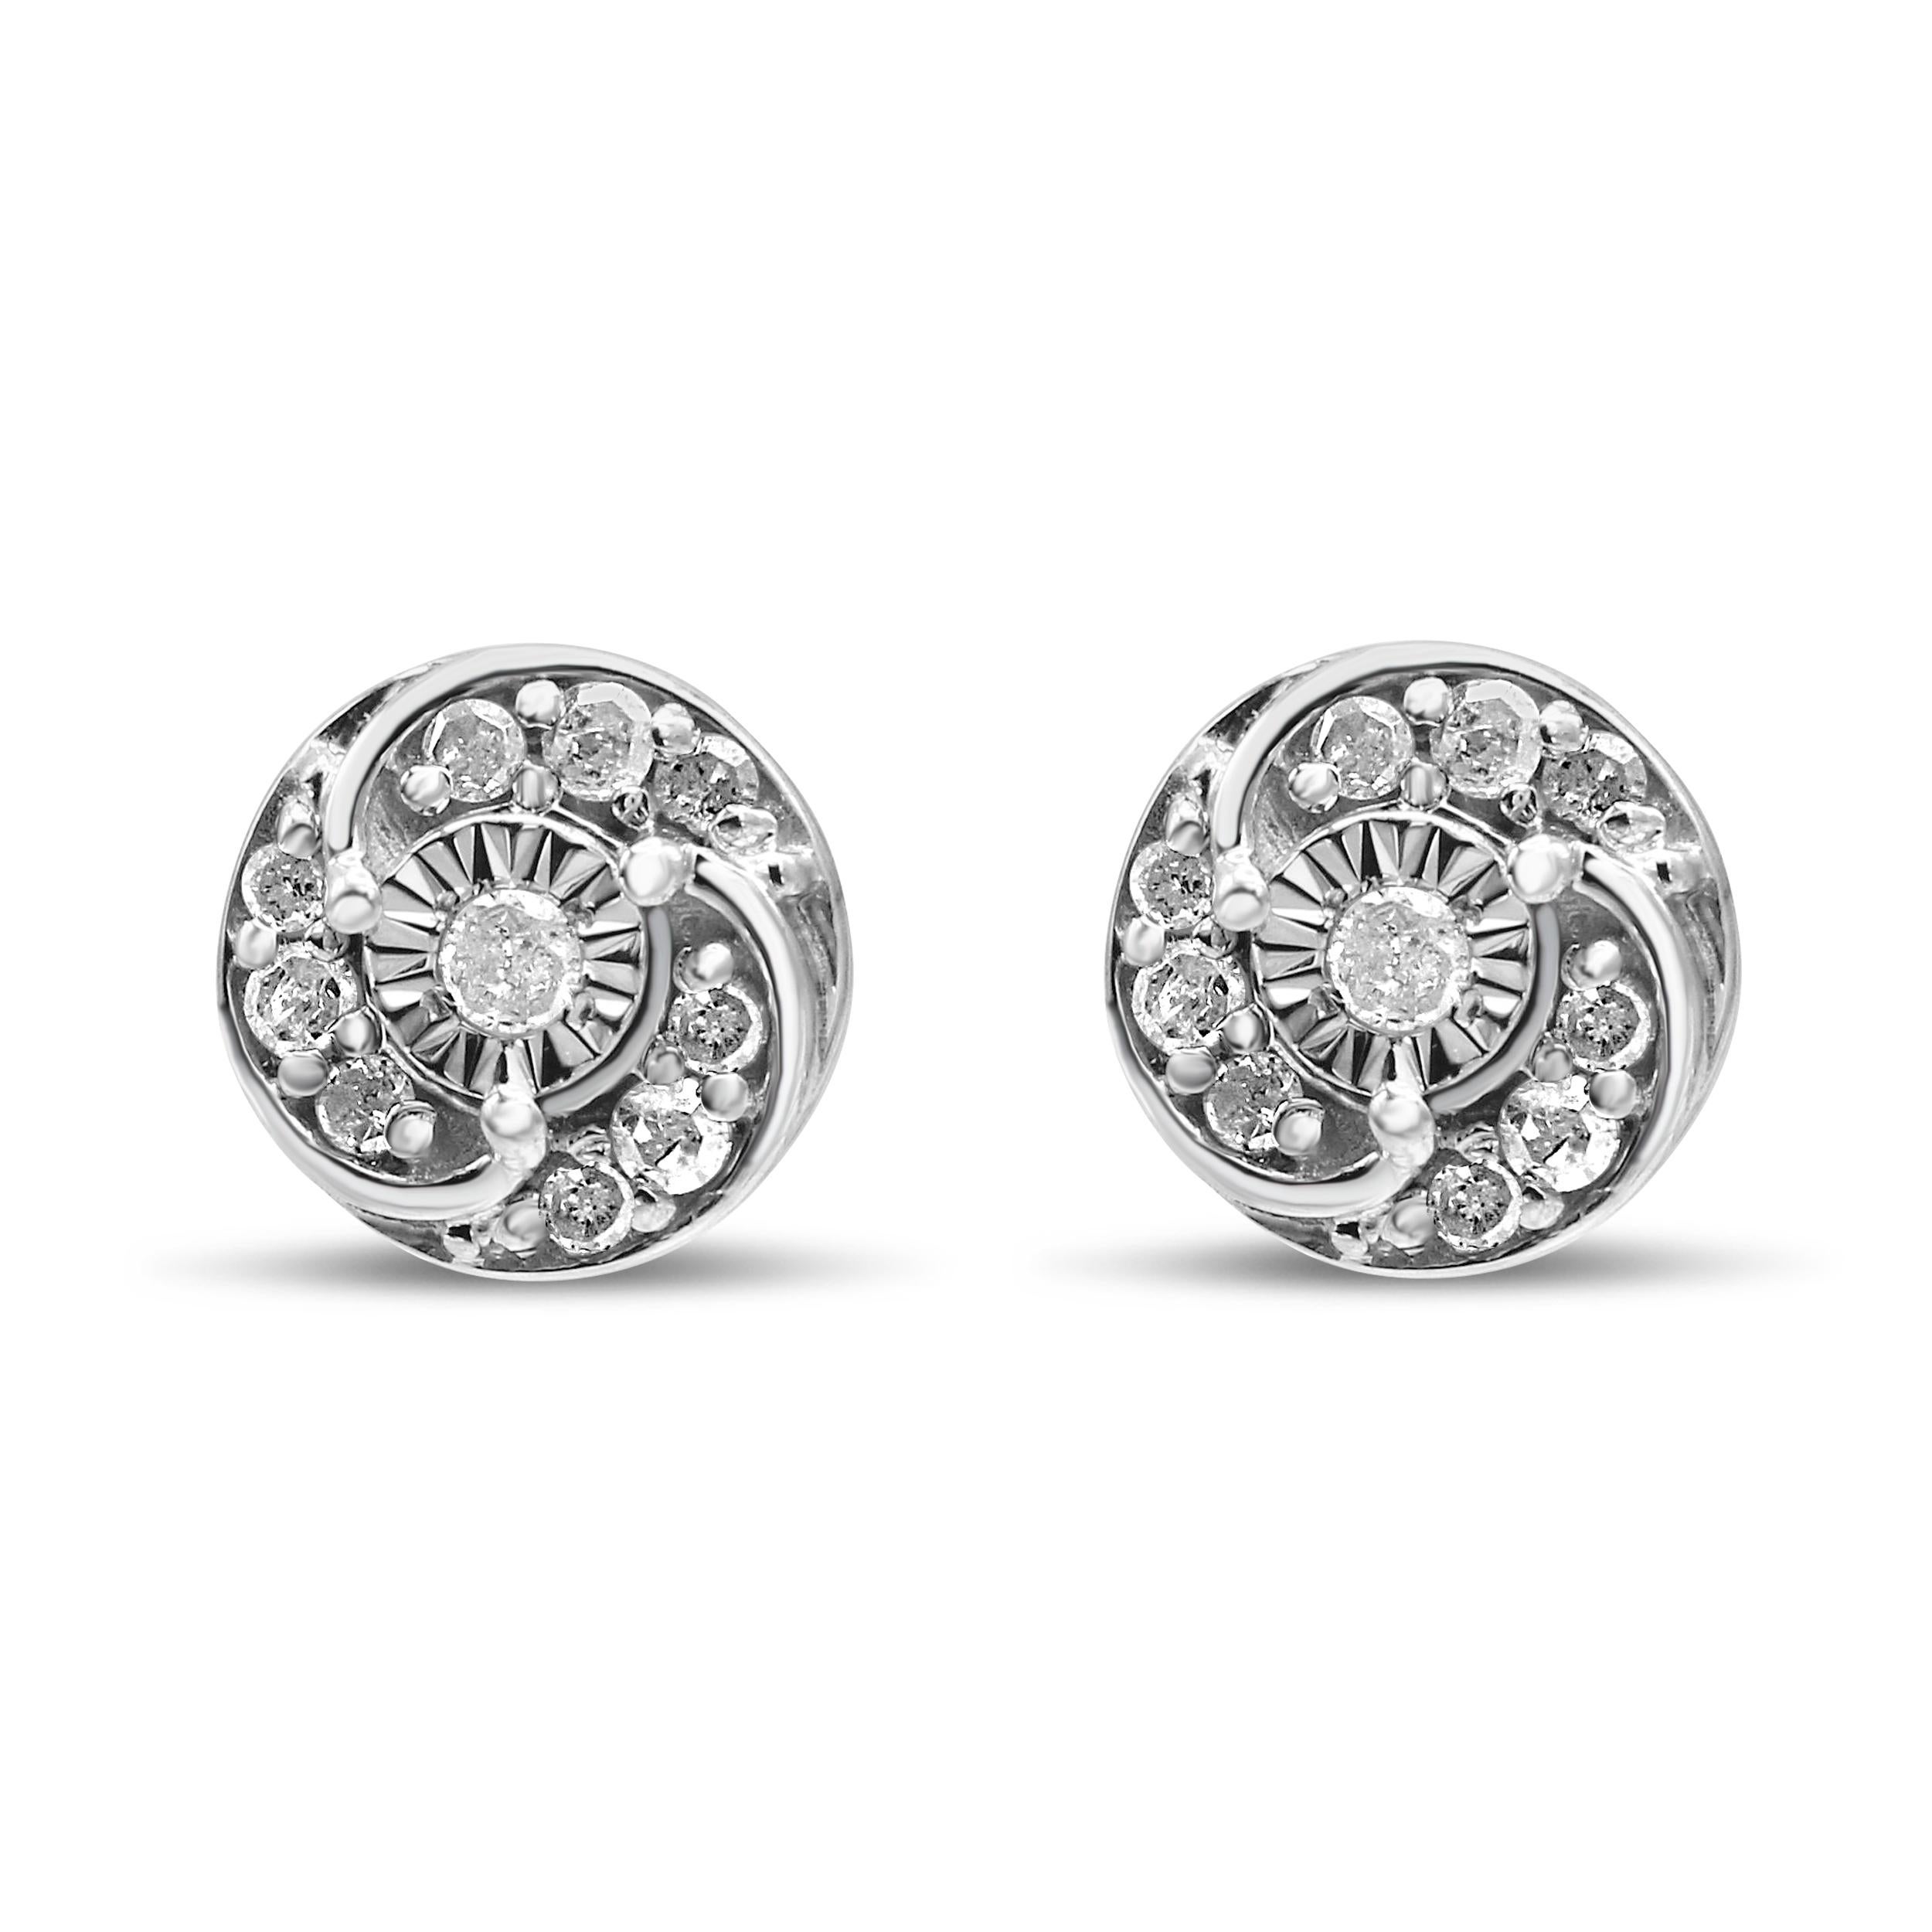 These diamond cluster earrings are mesmerizing in a spiraling design and heightened by luxurious textural elements. The total 1/4 cttw diamonds with an approximate I-J Color and I2-I3 Clarity will put a sparkle in your eye. The layout of the stones